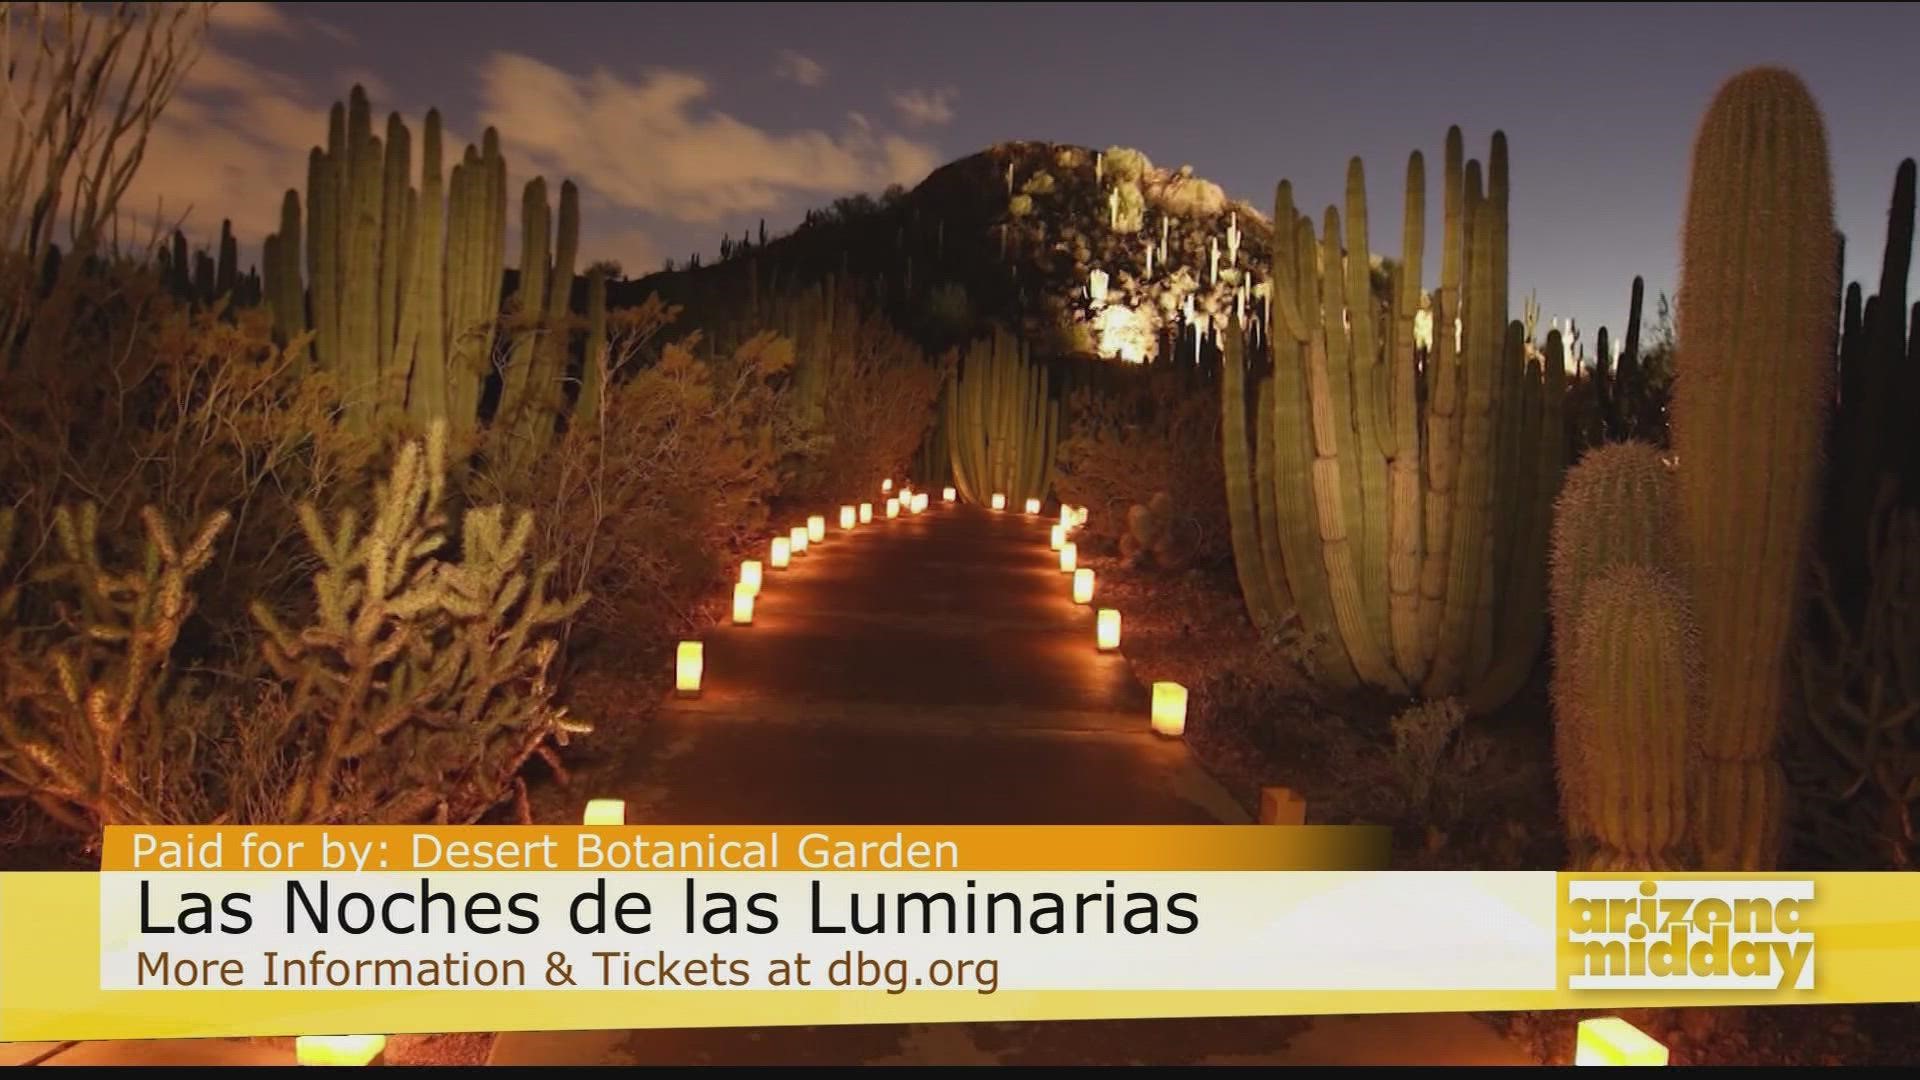 Amber Salazar with Desert Botanical Garden shows us what to expect at this year's Las Noches de las Luminarias event plus the art that will be at the gardens